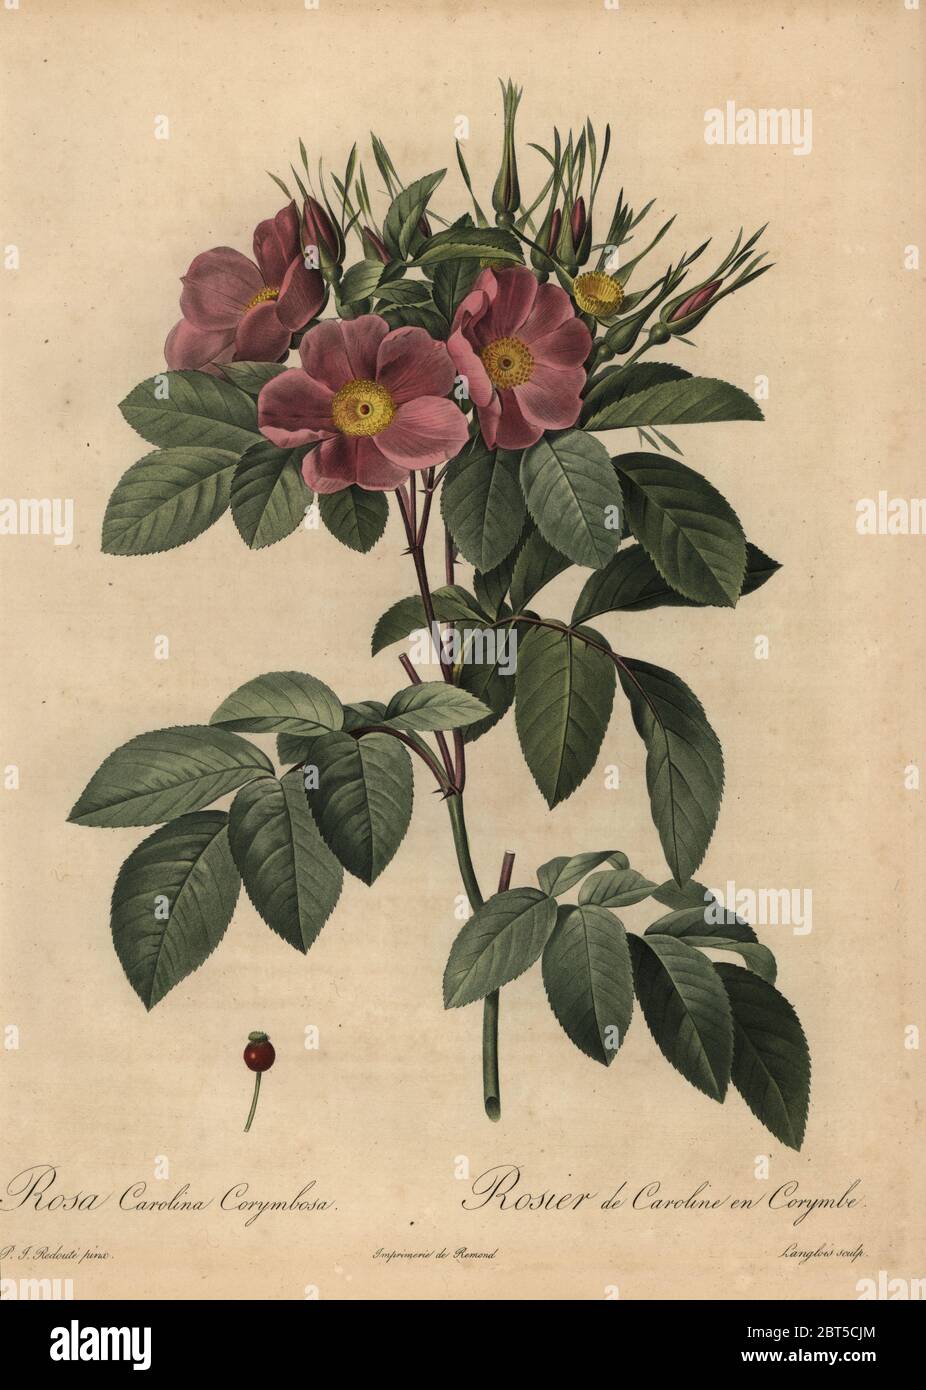 Purple Carolina rose or pasture rose, Rosa carolina corymbosa, Rosier de Caroline en Corymbe. Stipple copperplate engraving by Pierre Gabriel Langlois handcoloured a la poupee after a botanical illustration by Pierre-Joseph Redoute from the first folio edition of Les Roses, Firmin Didot, Paris, 1817. Stock Photo